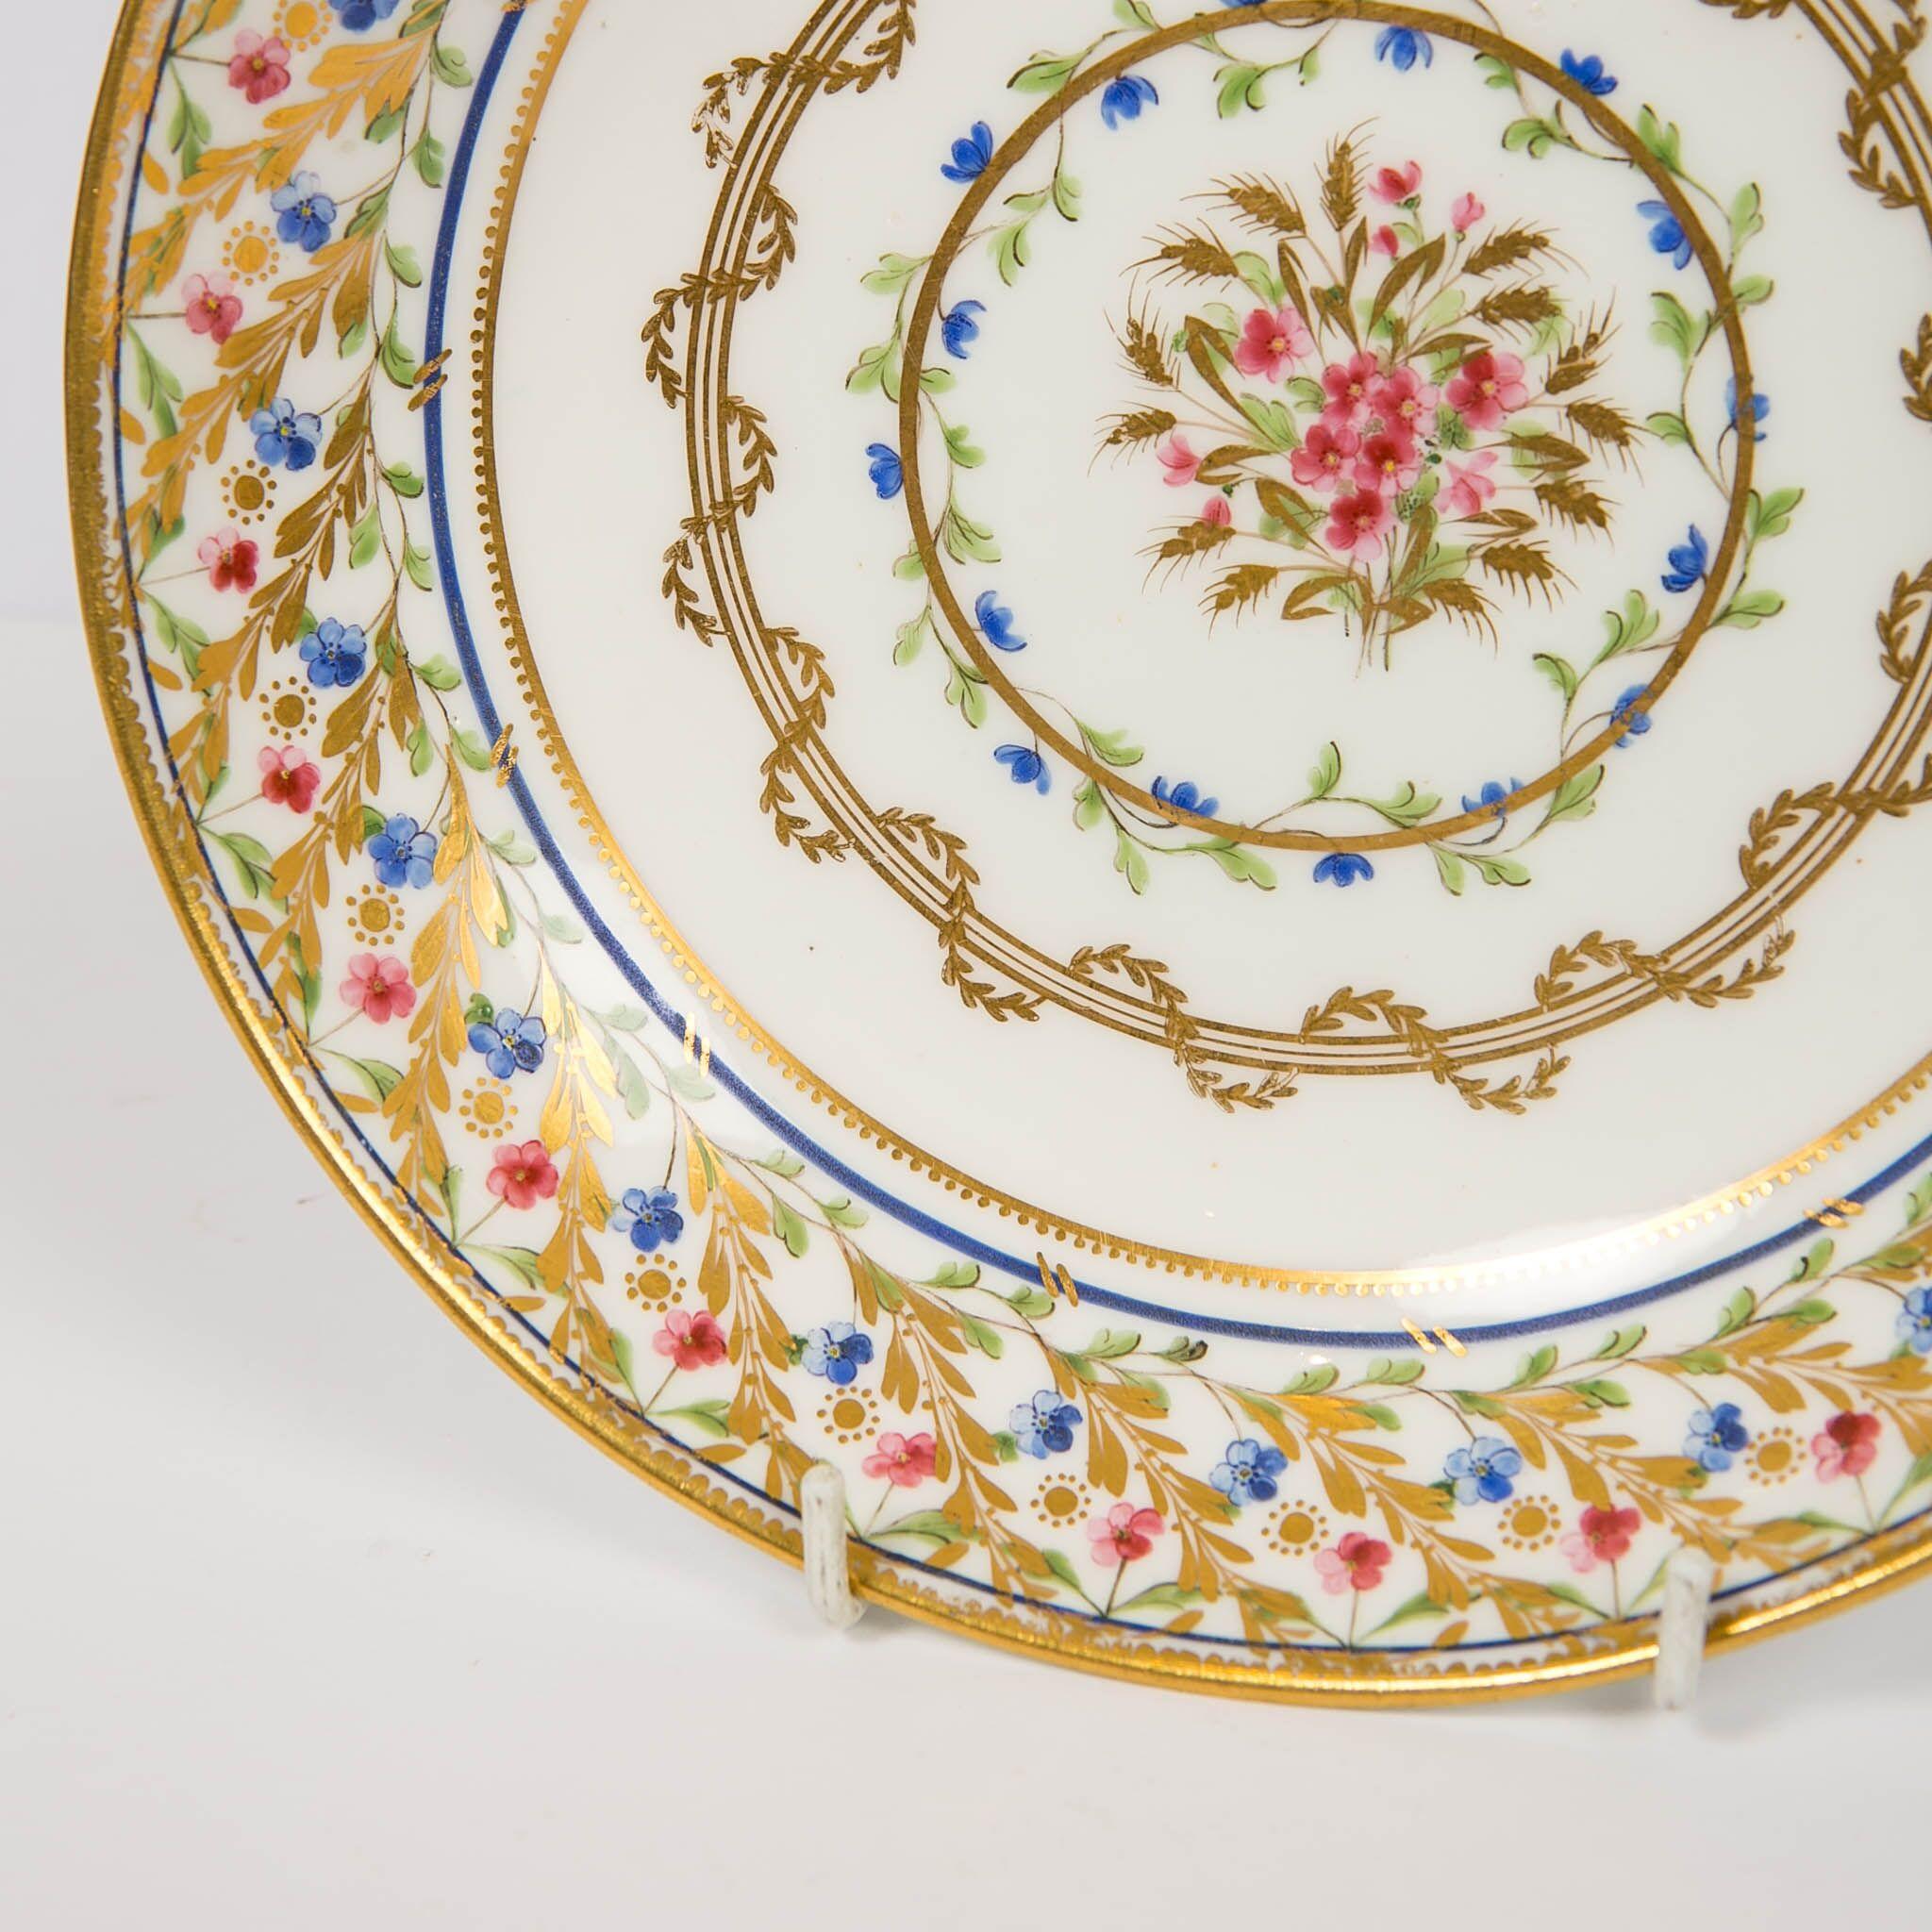 Louis XVI Sèvres Porcelain Dish Made 1793-1798 Marked Painted by D. Massy & Sèvres